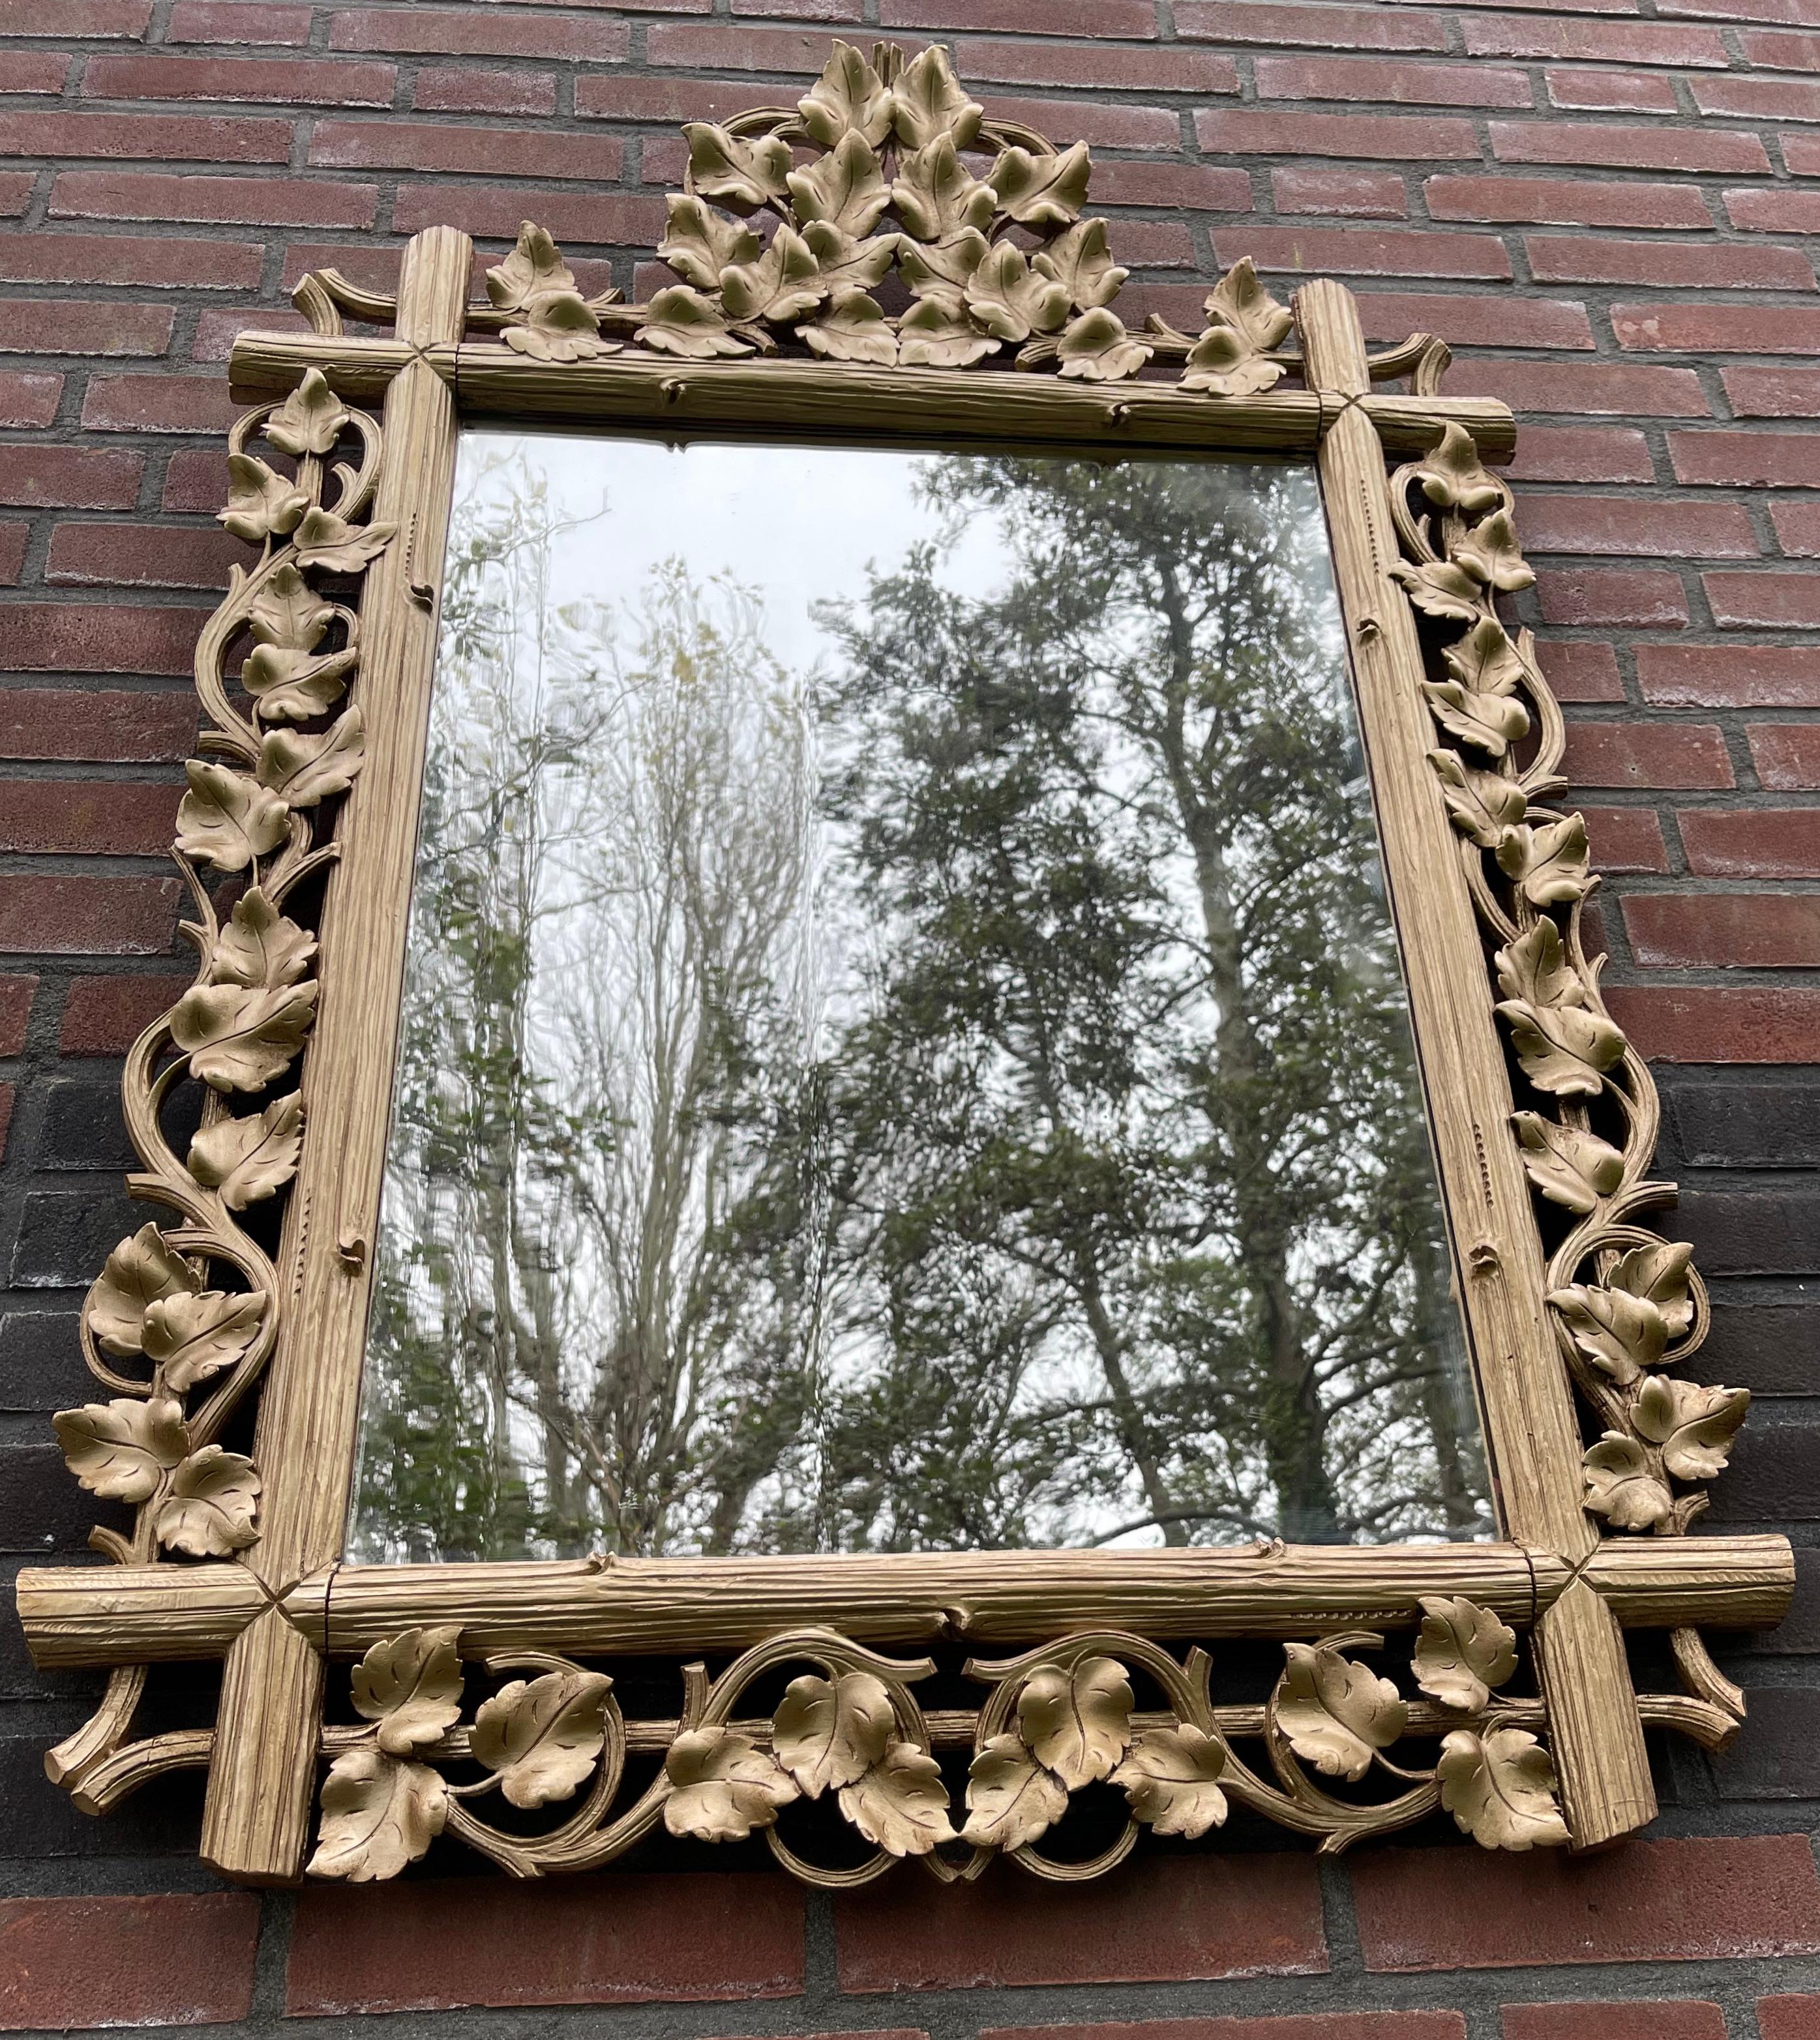 Antique, one of a kind and highly decorative organic hand carved mirror. 

This beautiful, golden color refinished, hand-carved mirror frame with the original mirror from the late 19th century is in great condition. It is perfectly hand carved